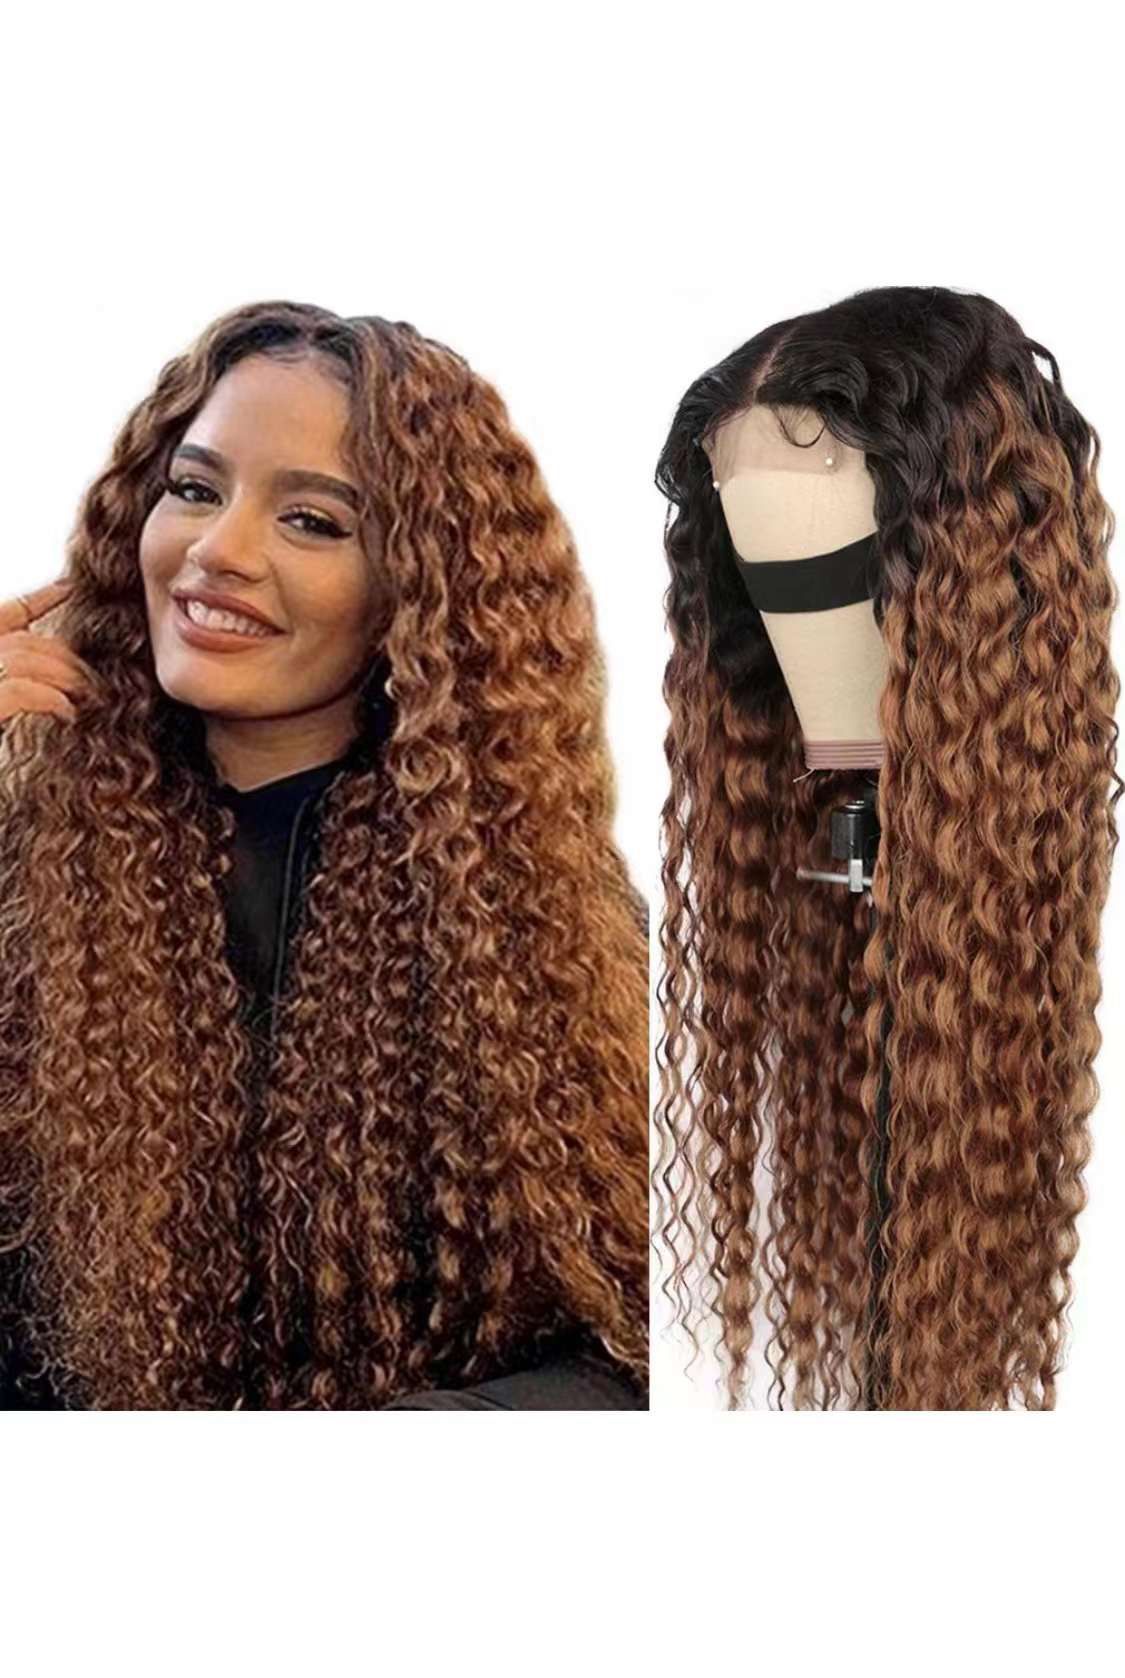 Ombre Water Wave Closure Wig Human Hair Ombre 4x4 Lace Front Wig Pre Plucked Brazilian Curly Wig For Black Women 26 Inch 150% Density Brown